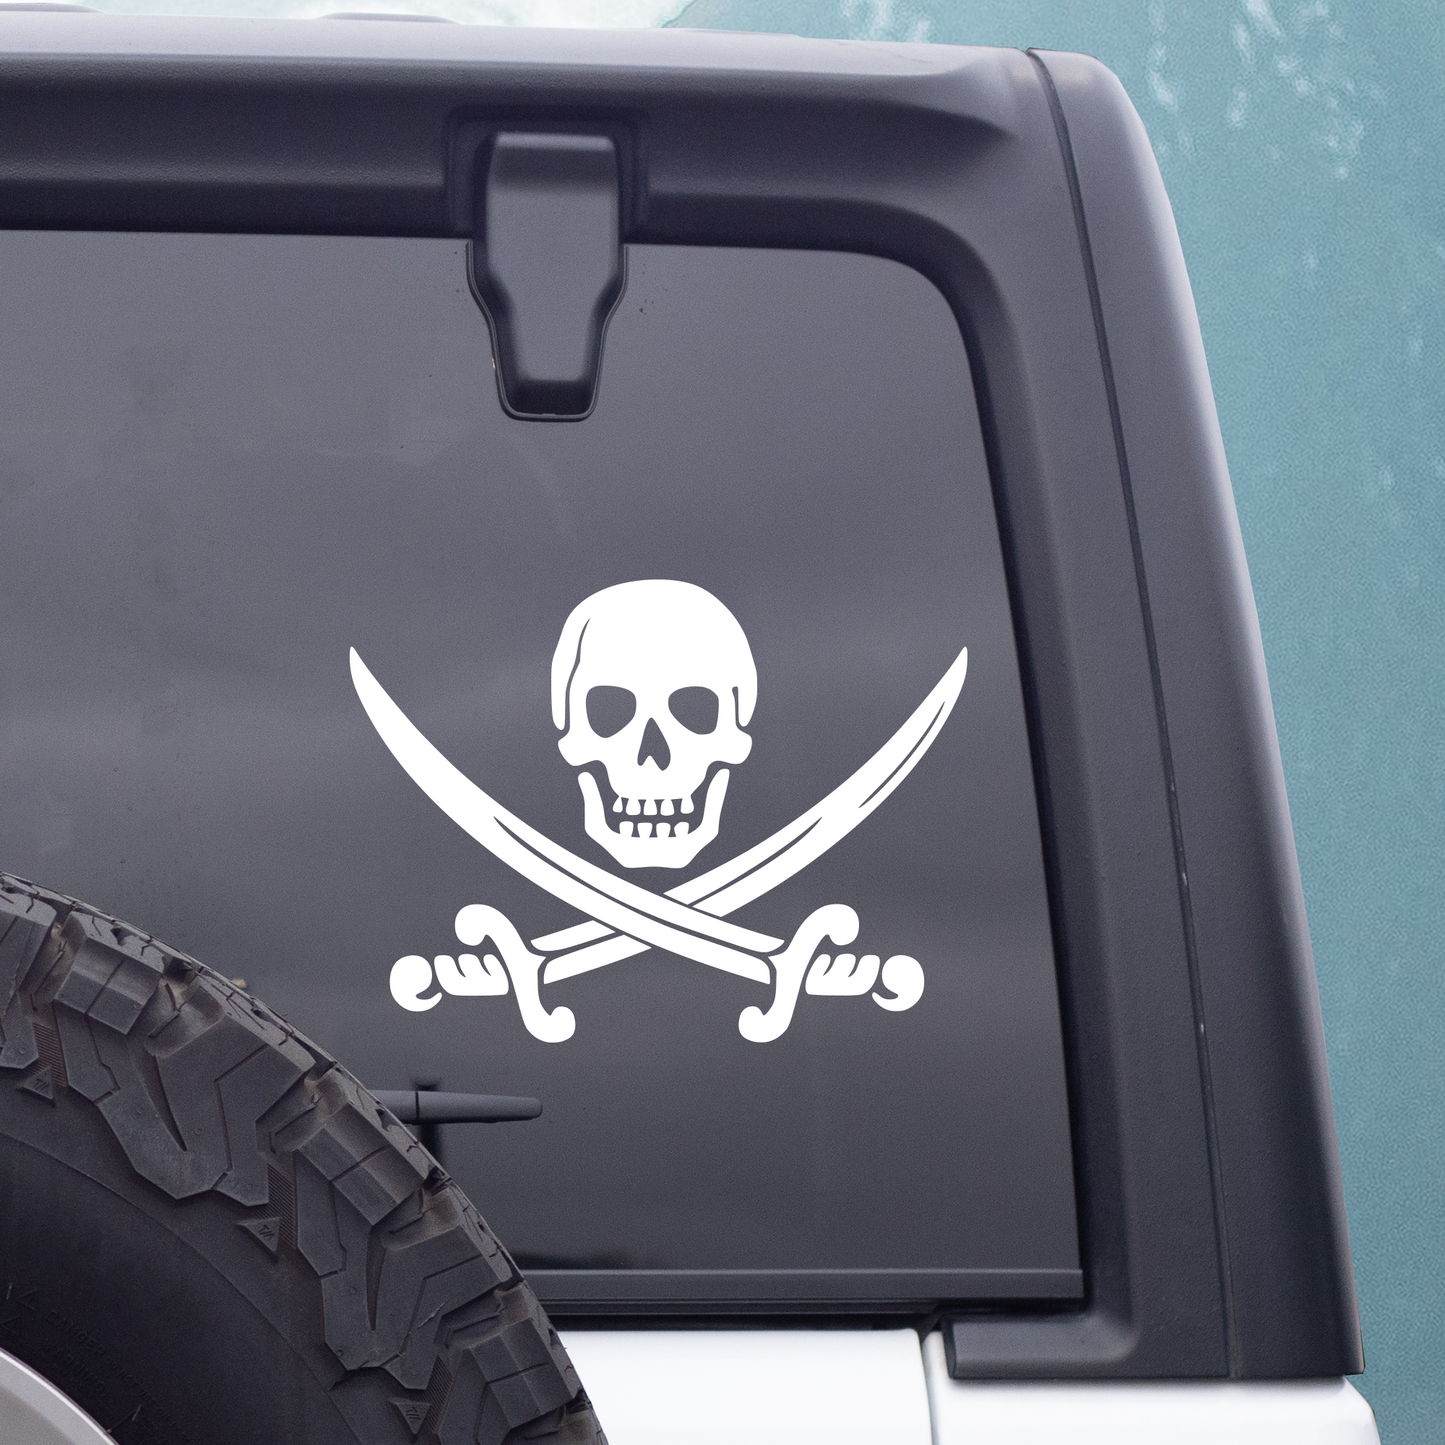 Jolly Roger Pirate Decal, Skull and Cross Swords, Pirate Sticker, Vinyl Decal Sticker, Car Window Decal, Tumbler Decal